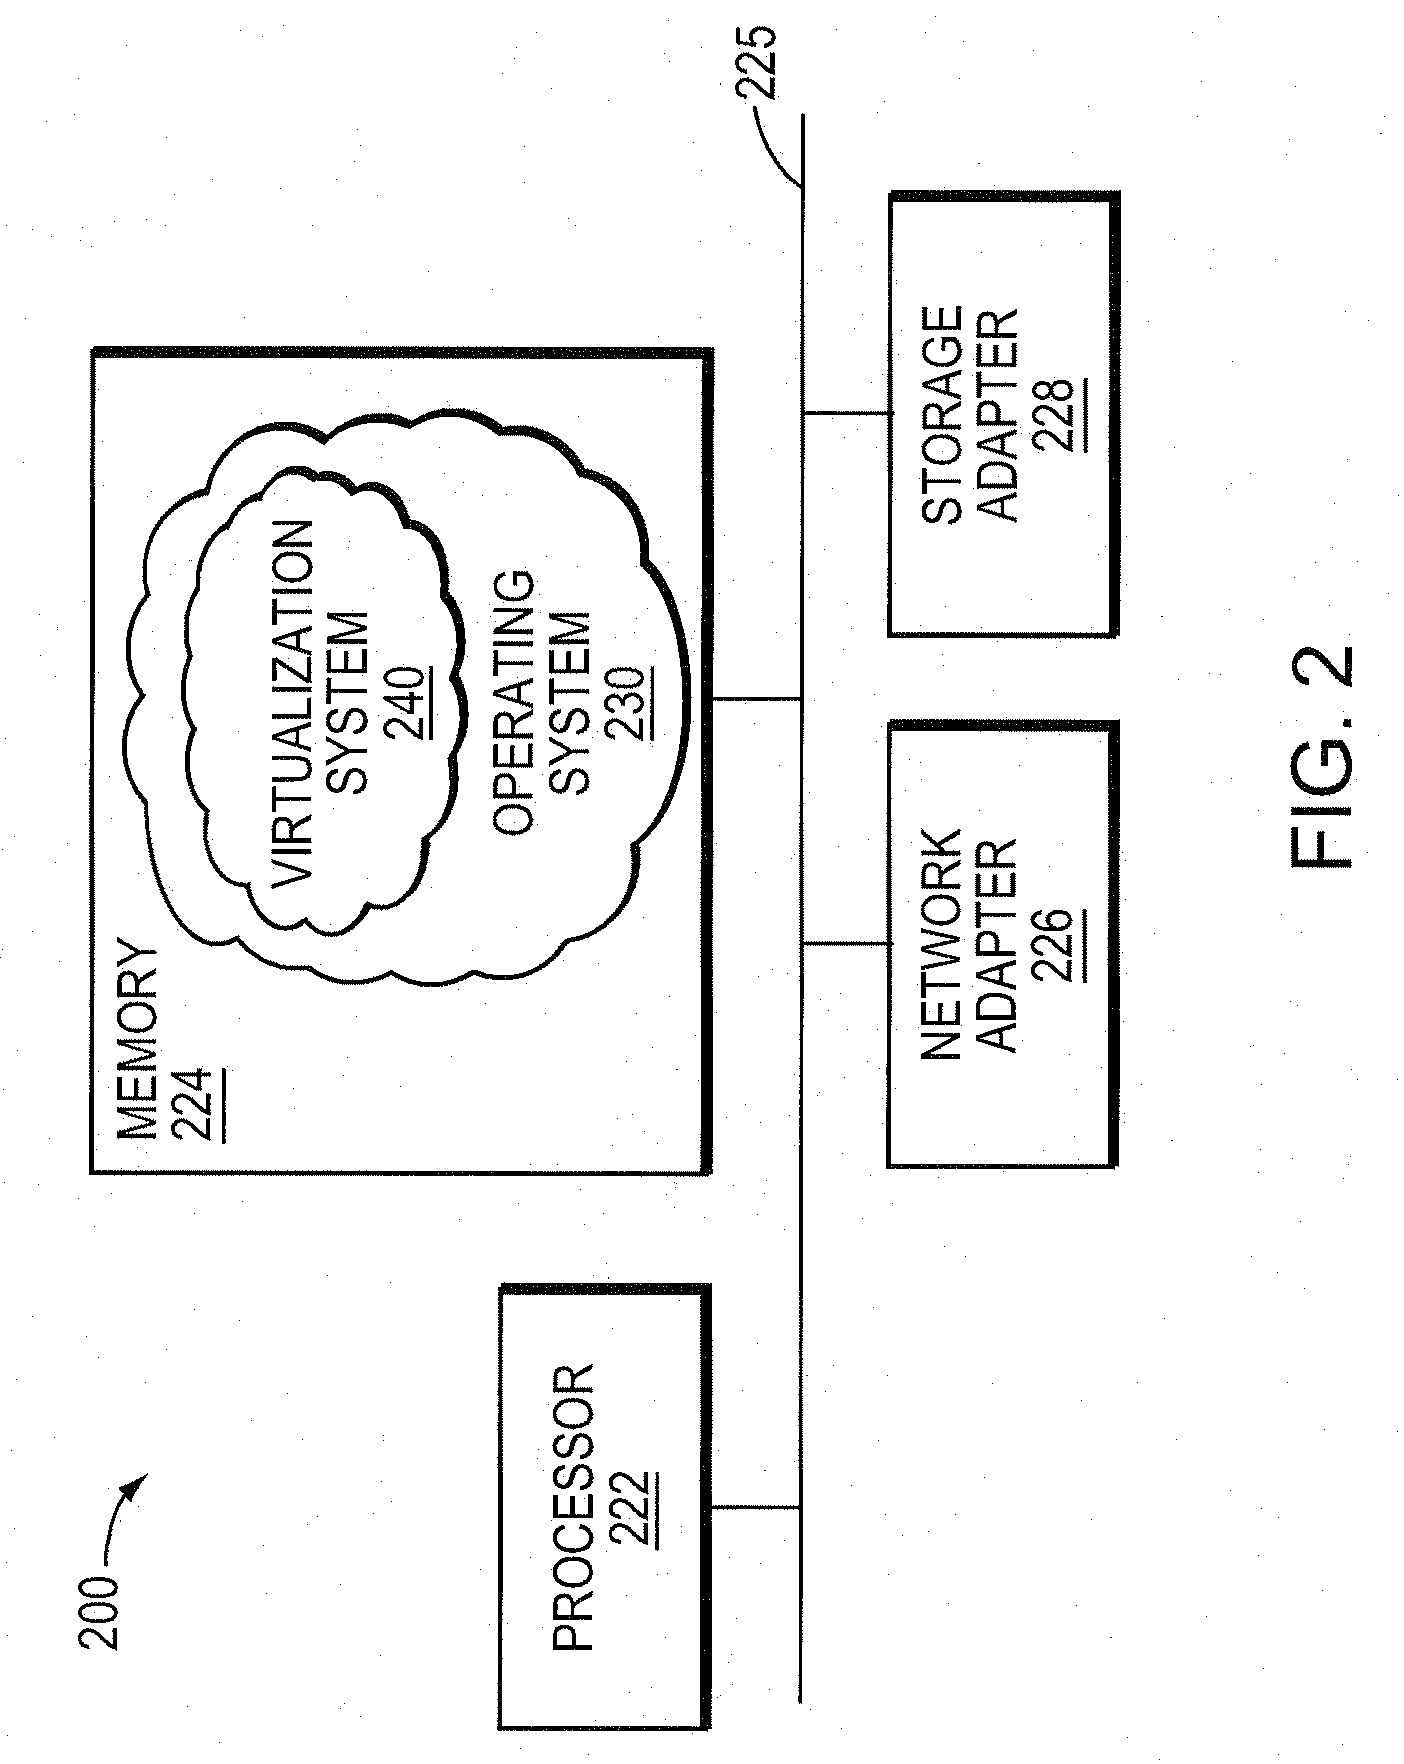 System and Method for Providing Uninterrupted Operation of a Replication System During a Software Upgrade